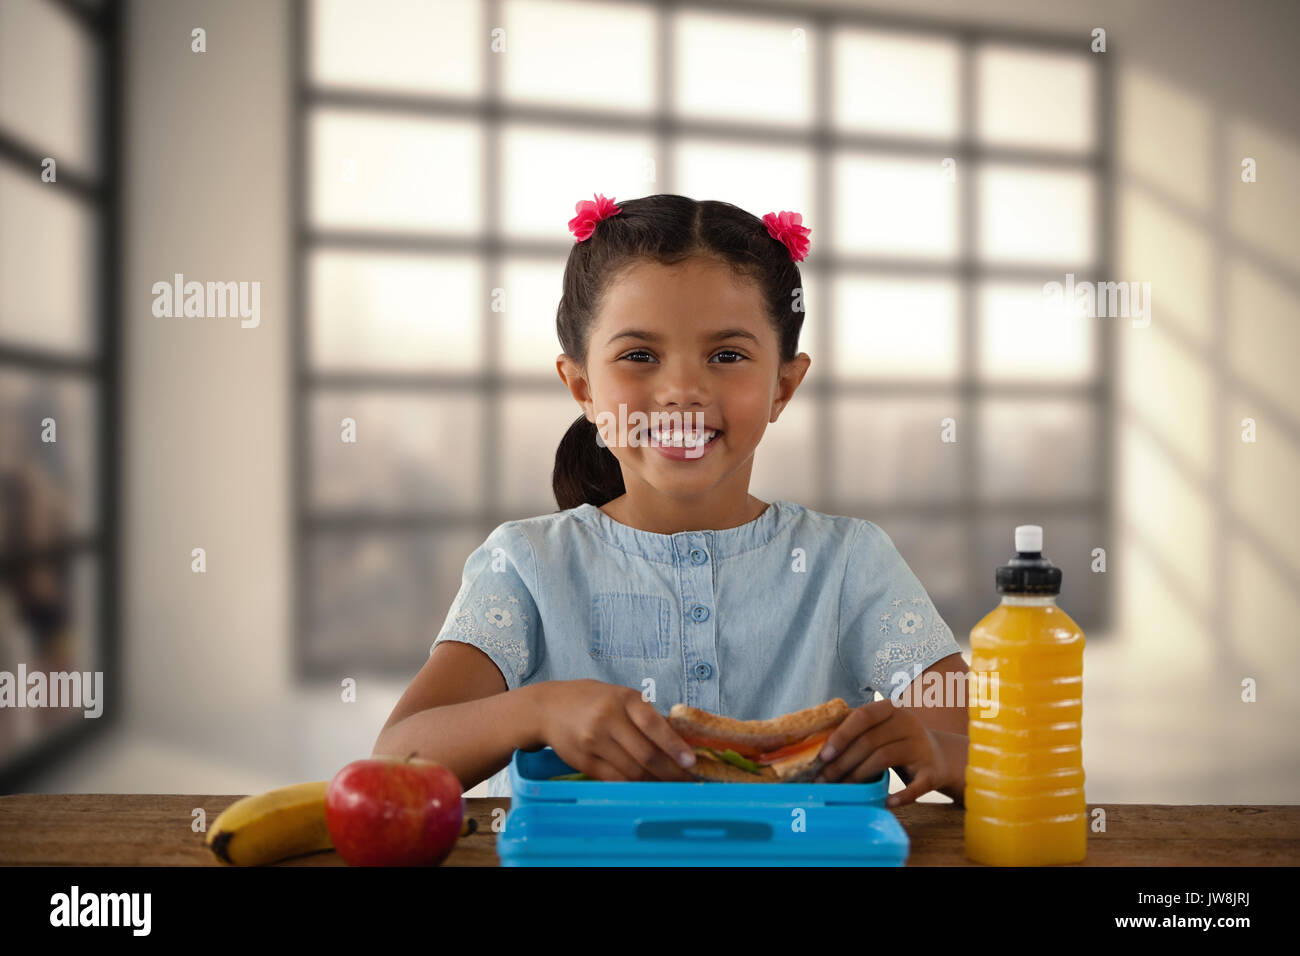 Smiling girl having sandwich at table against room with large window showing city Stock Photo